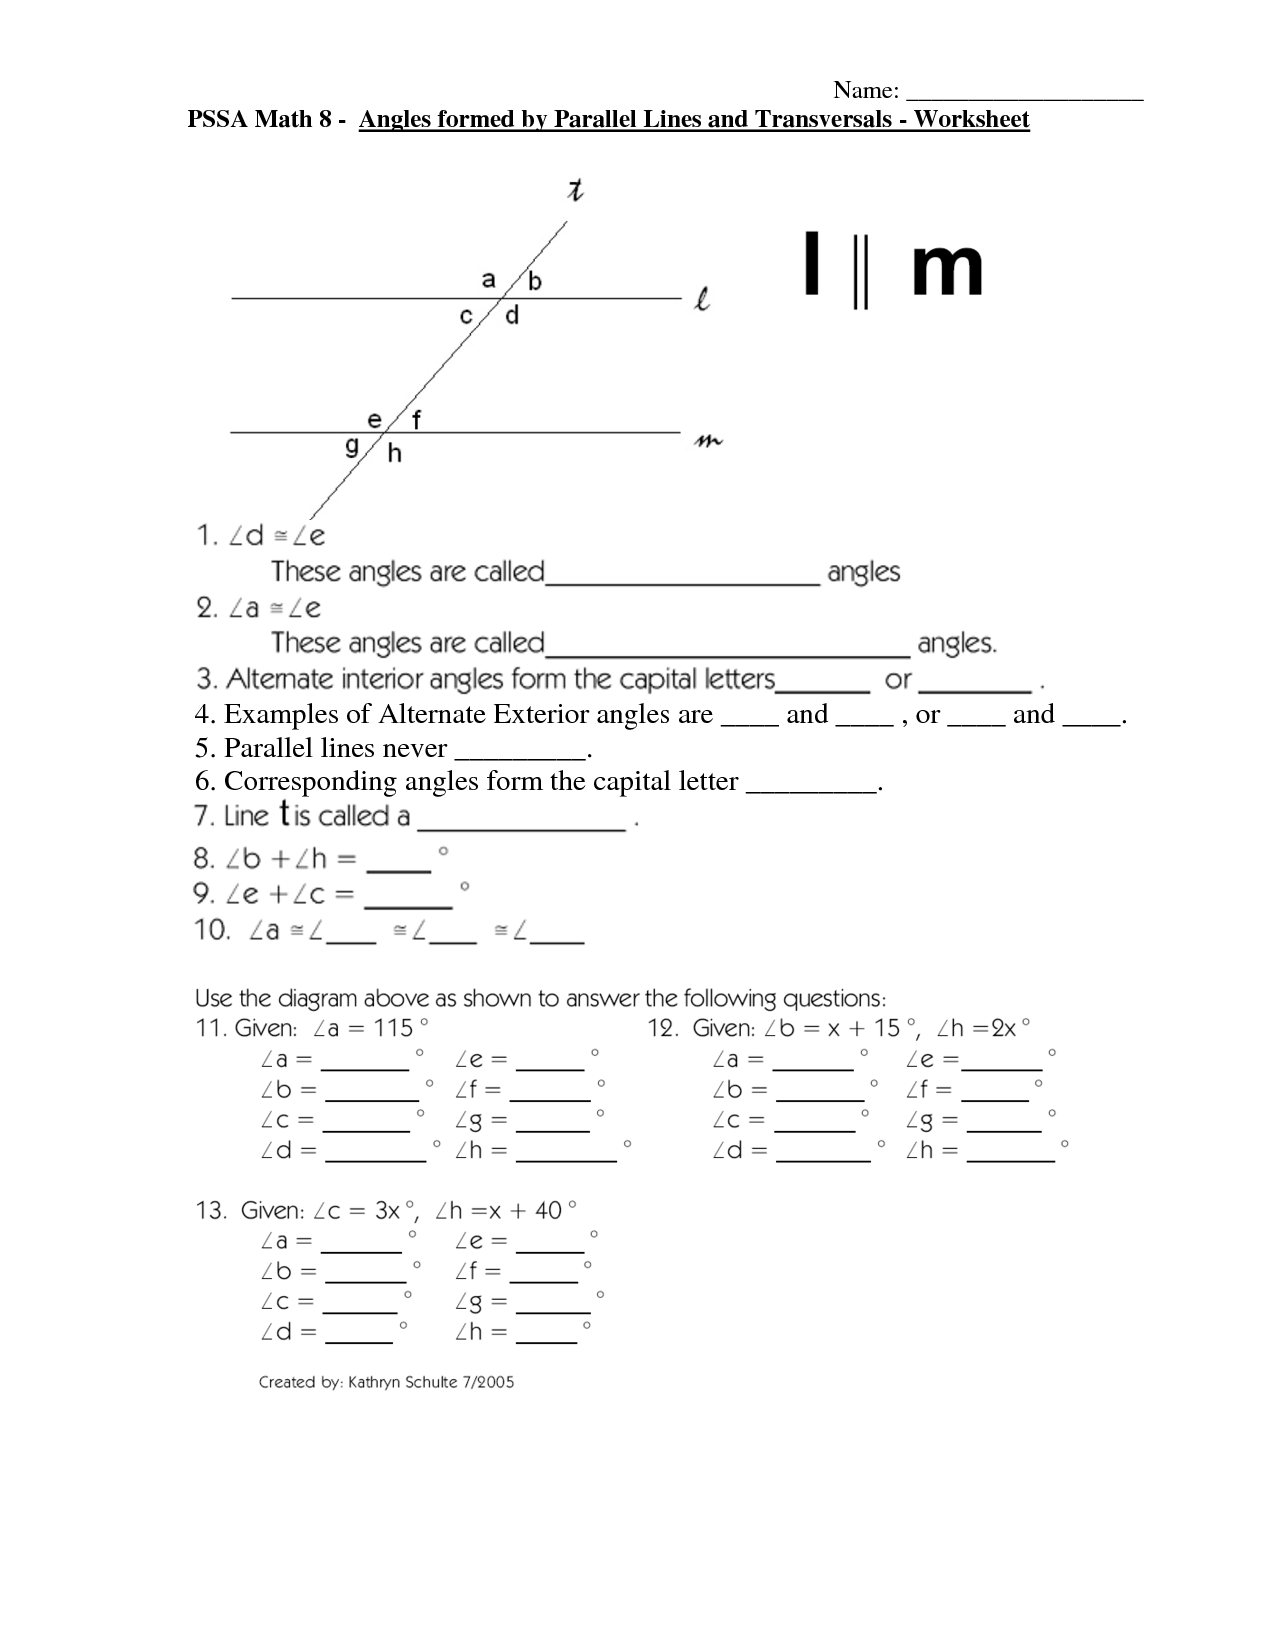 11 Best Images of Lines And Transversal Angles Worksheet  Angle Parallel Lines and Transversals 